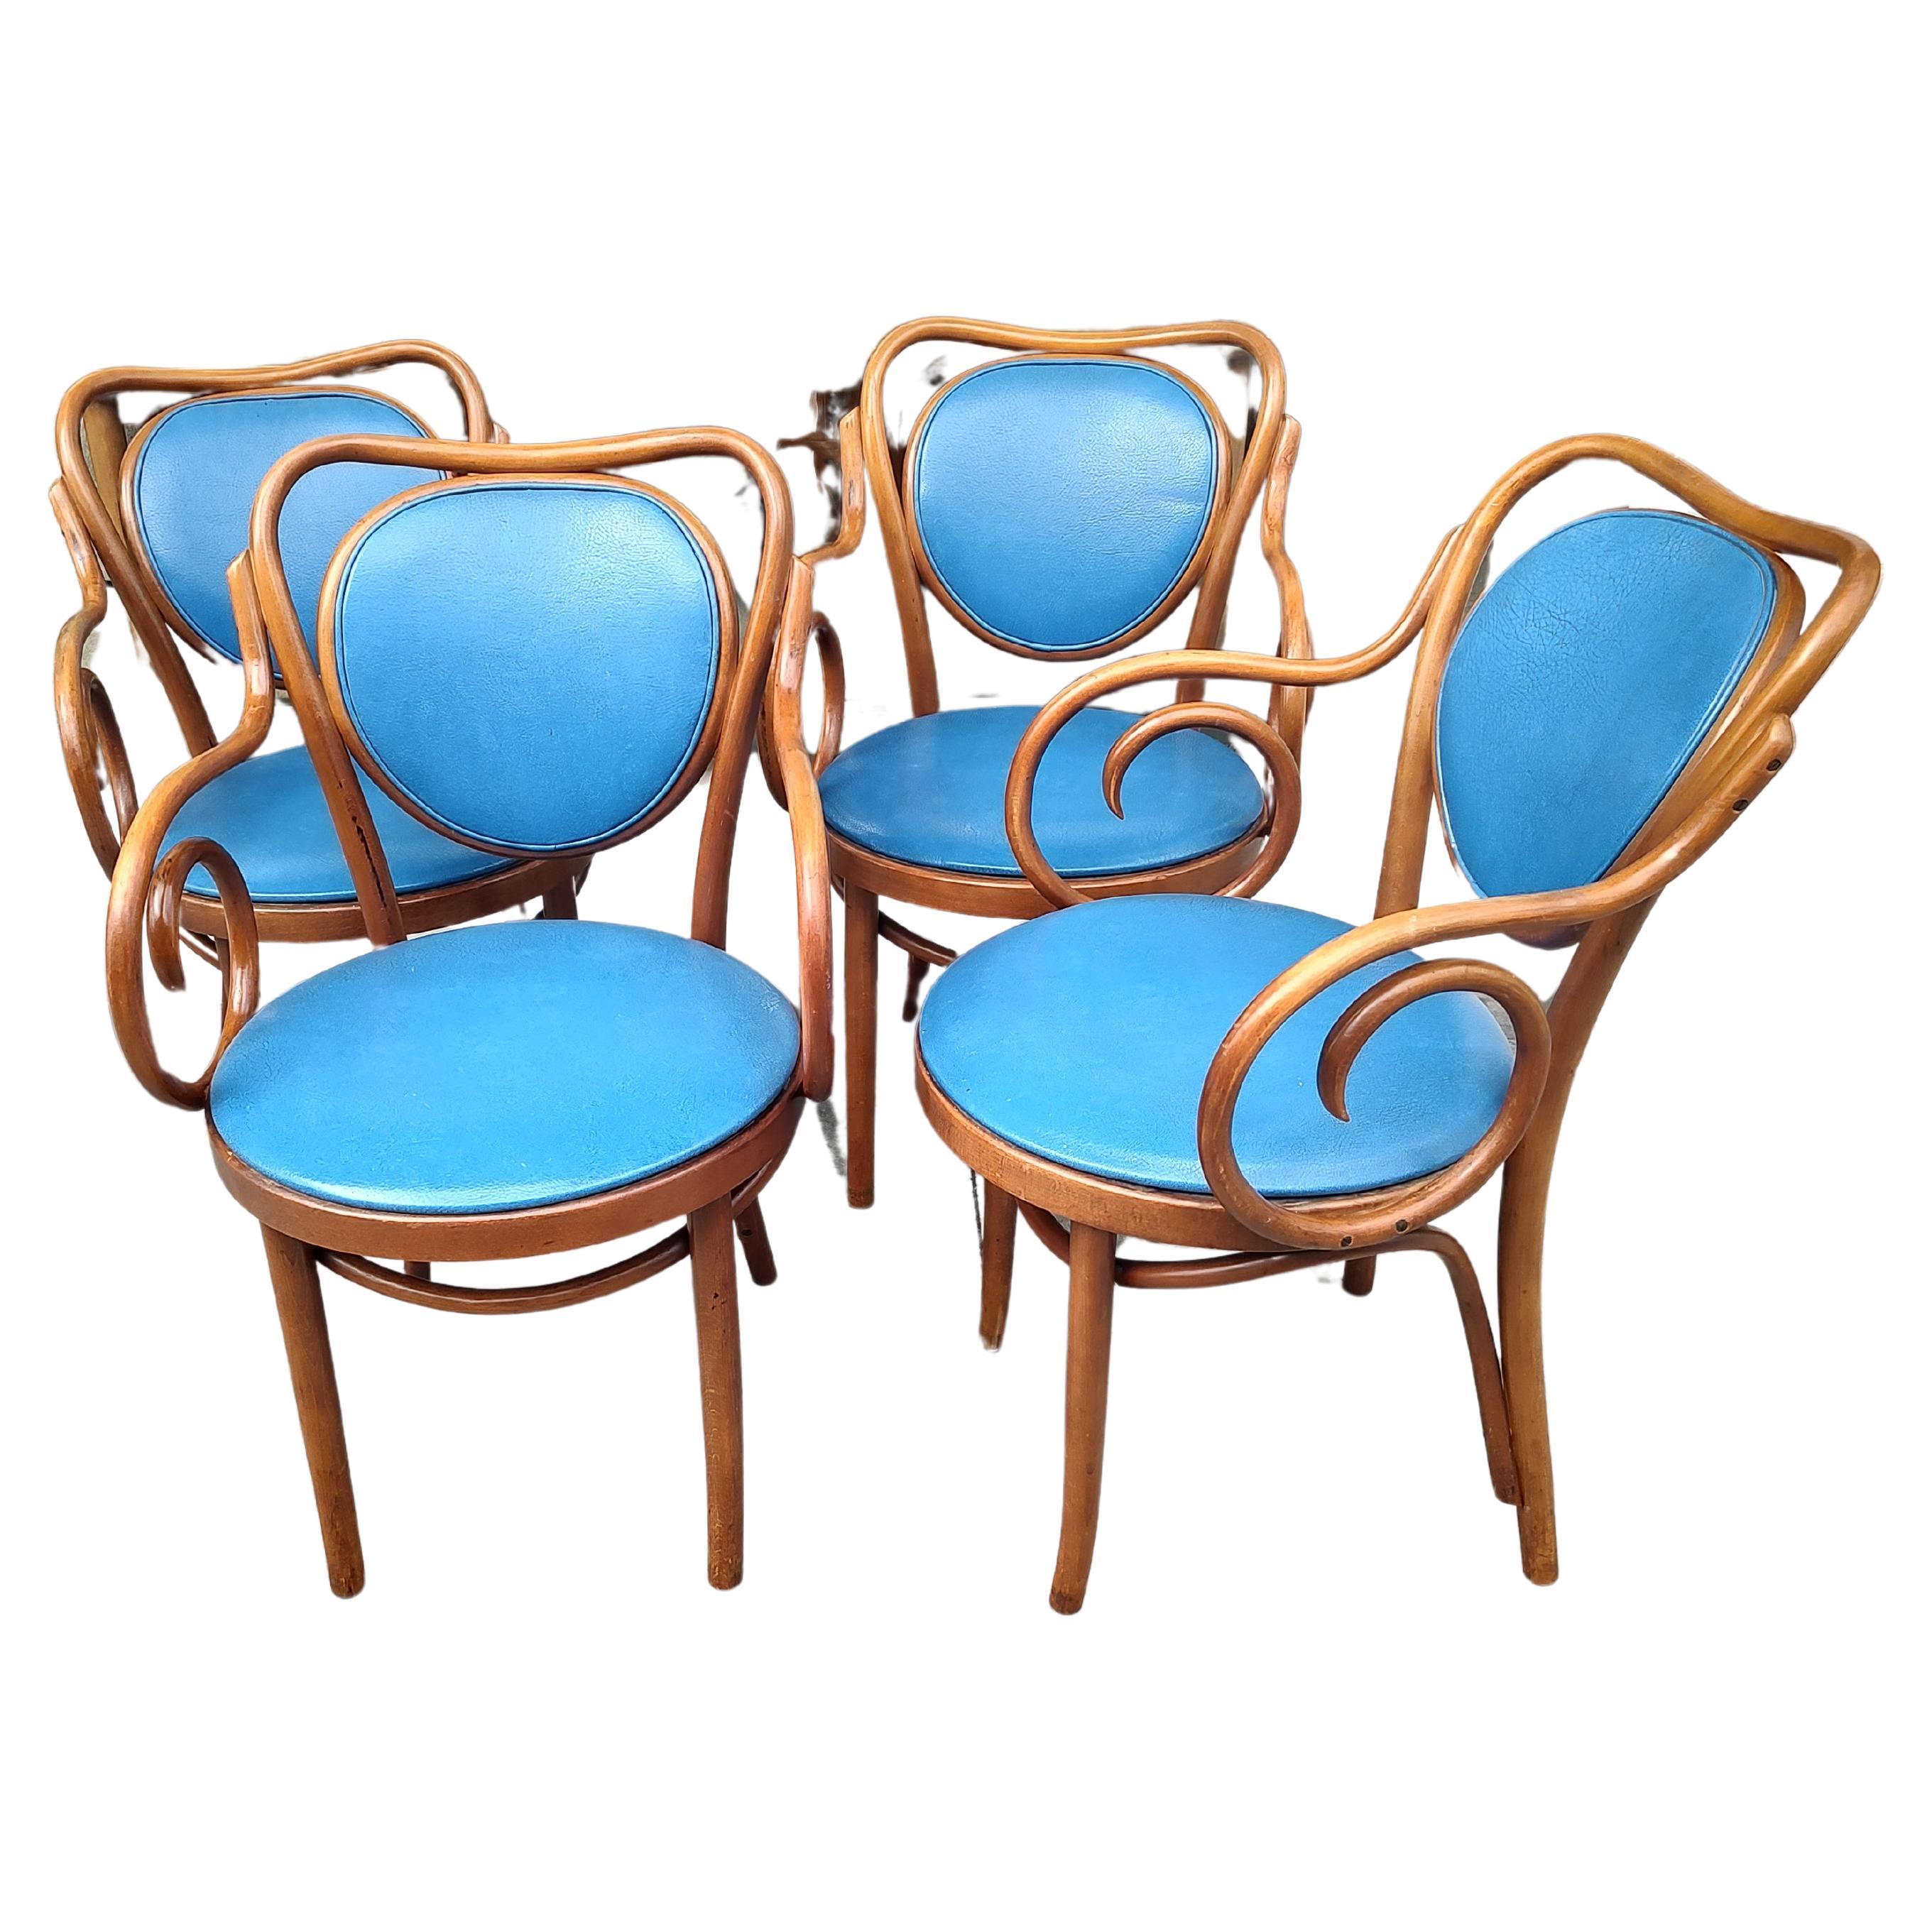 Modern Mid-Century Set of 4 Thonet Style Bentwood Dining Room Armchairs For Sale